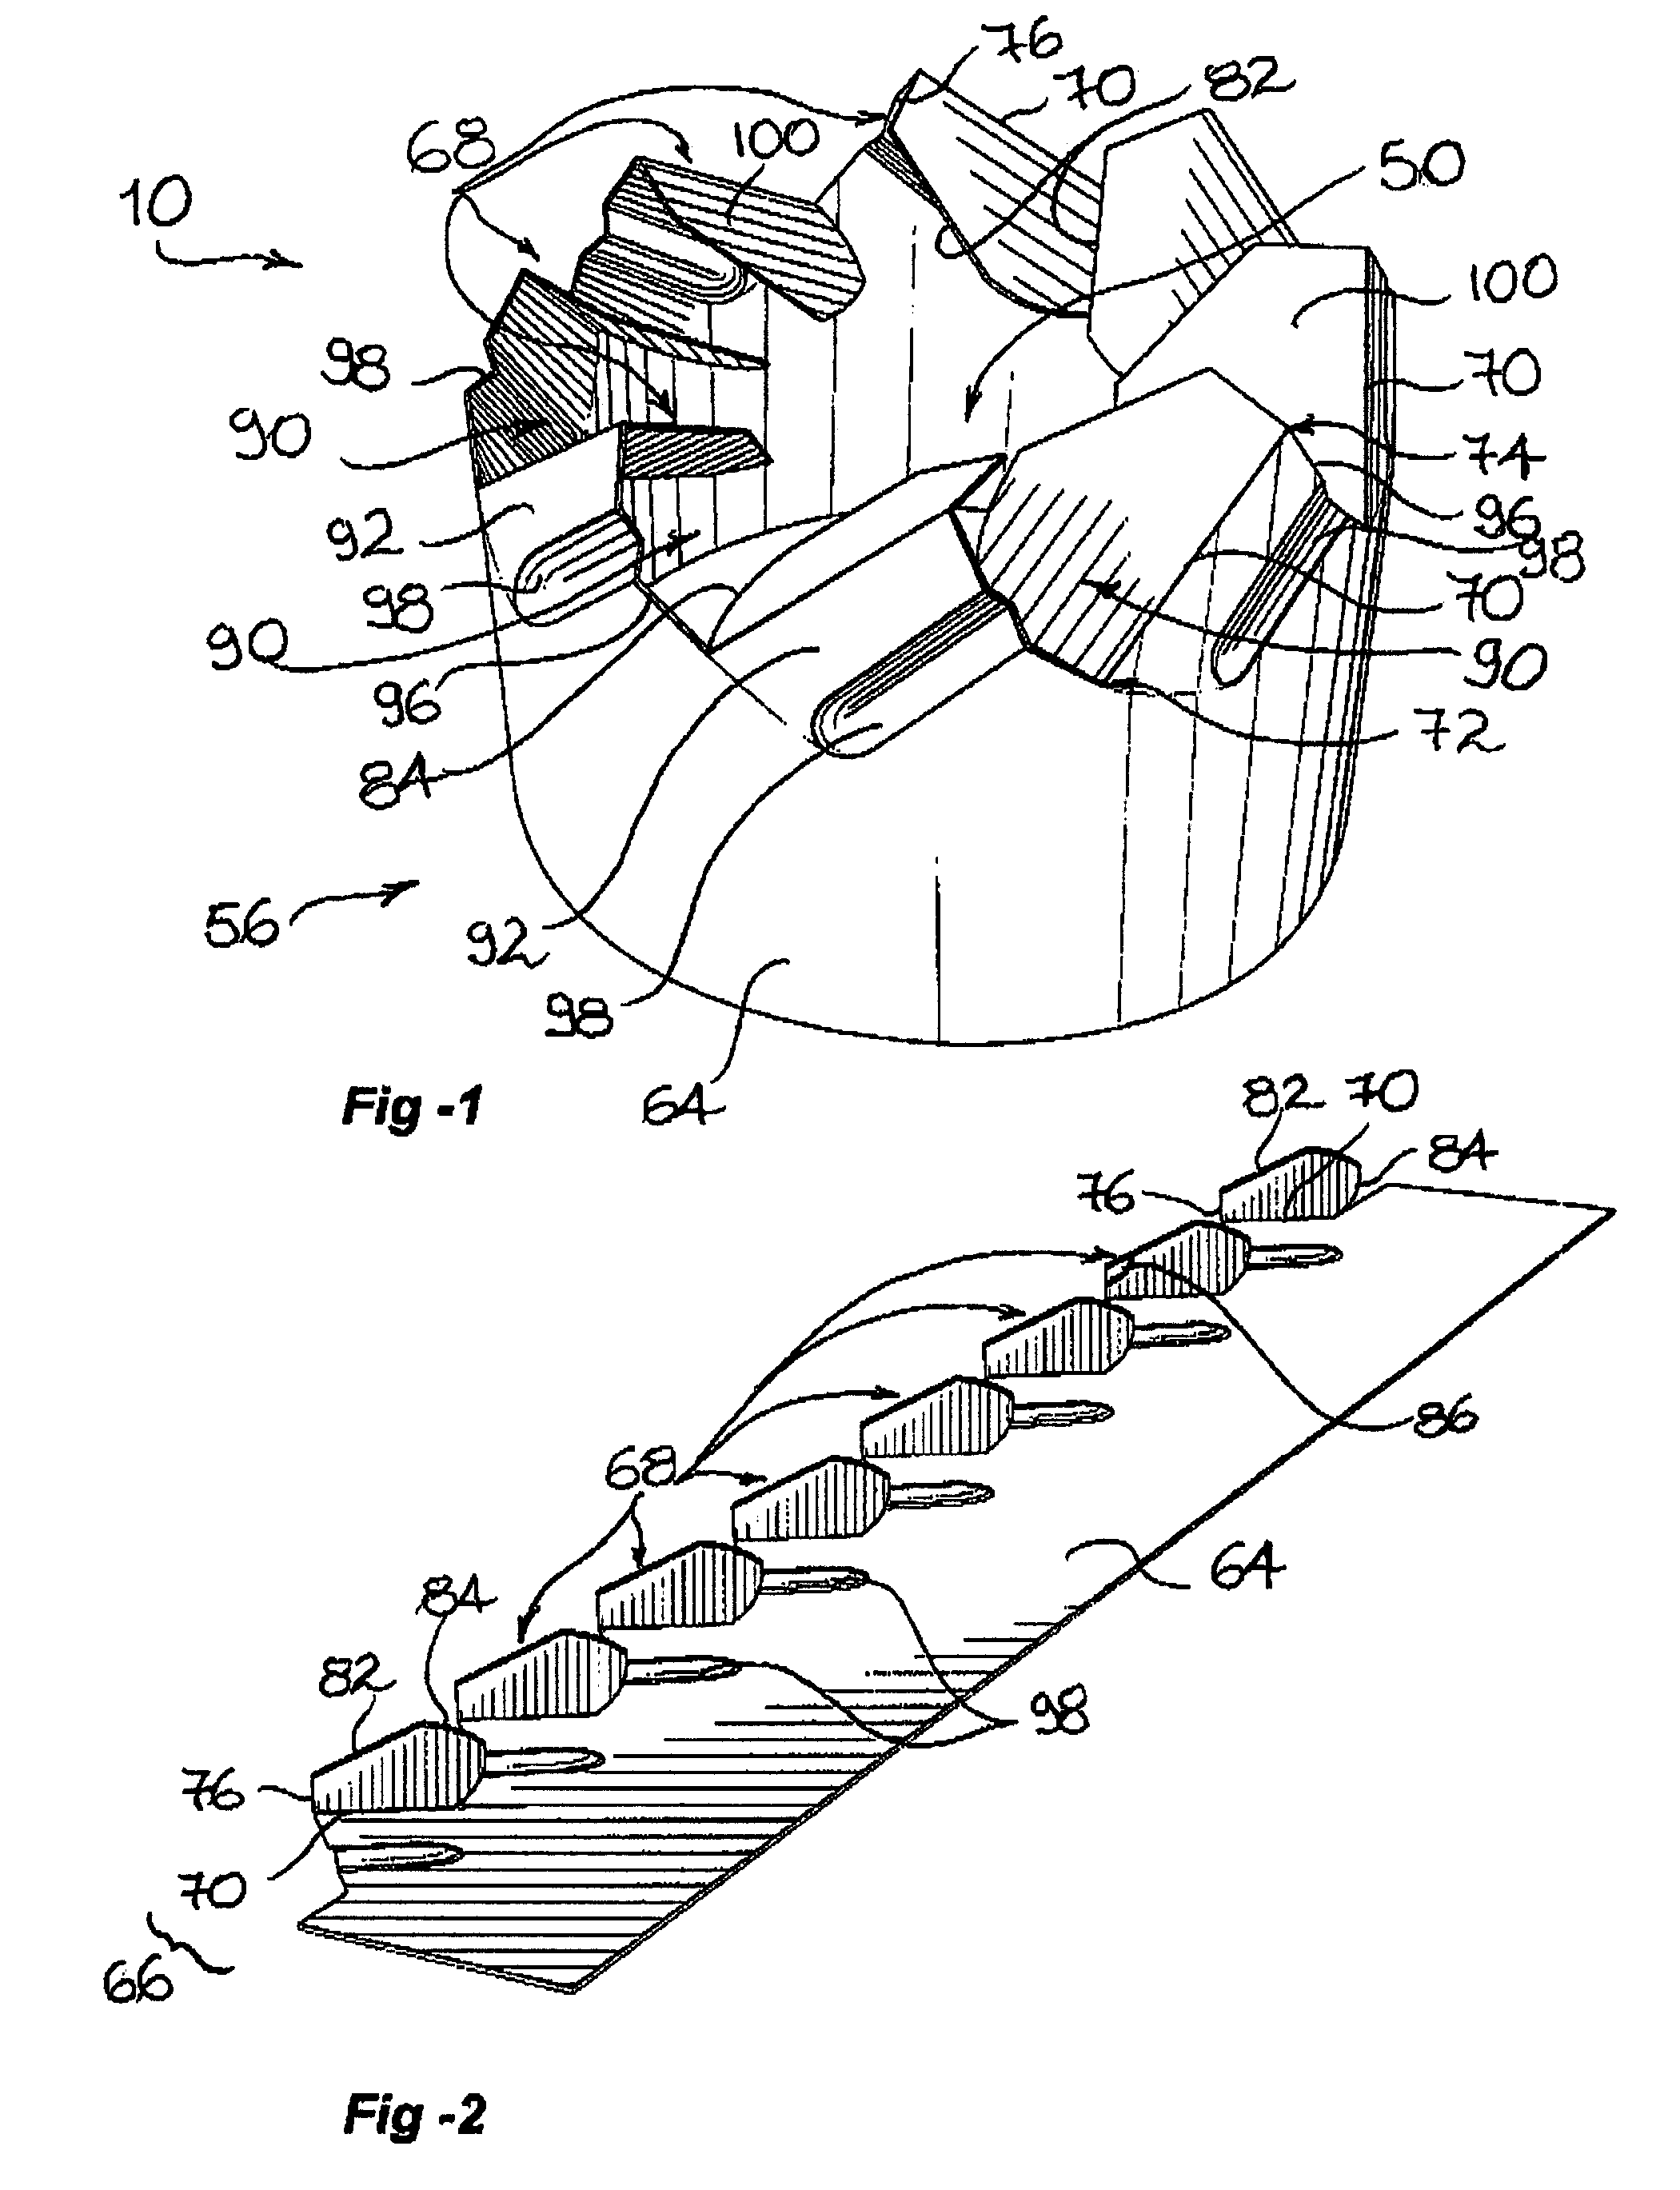 Flow guiding structure for an internal combustion engine